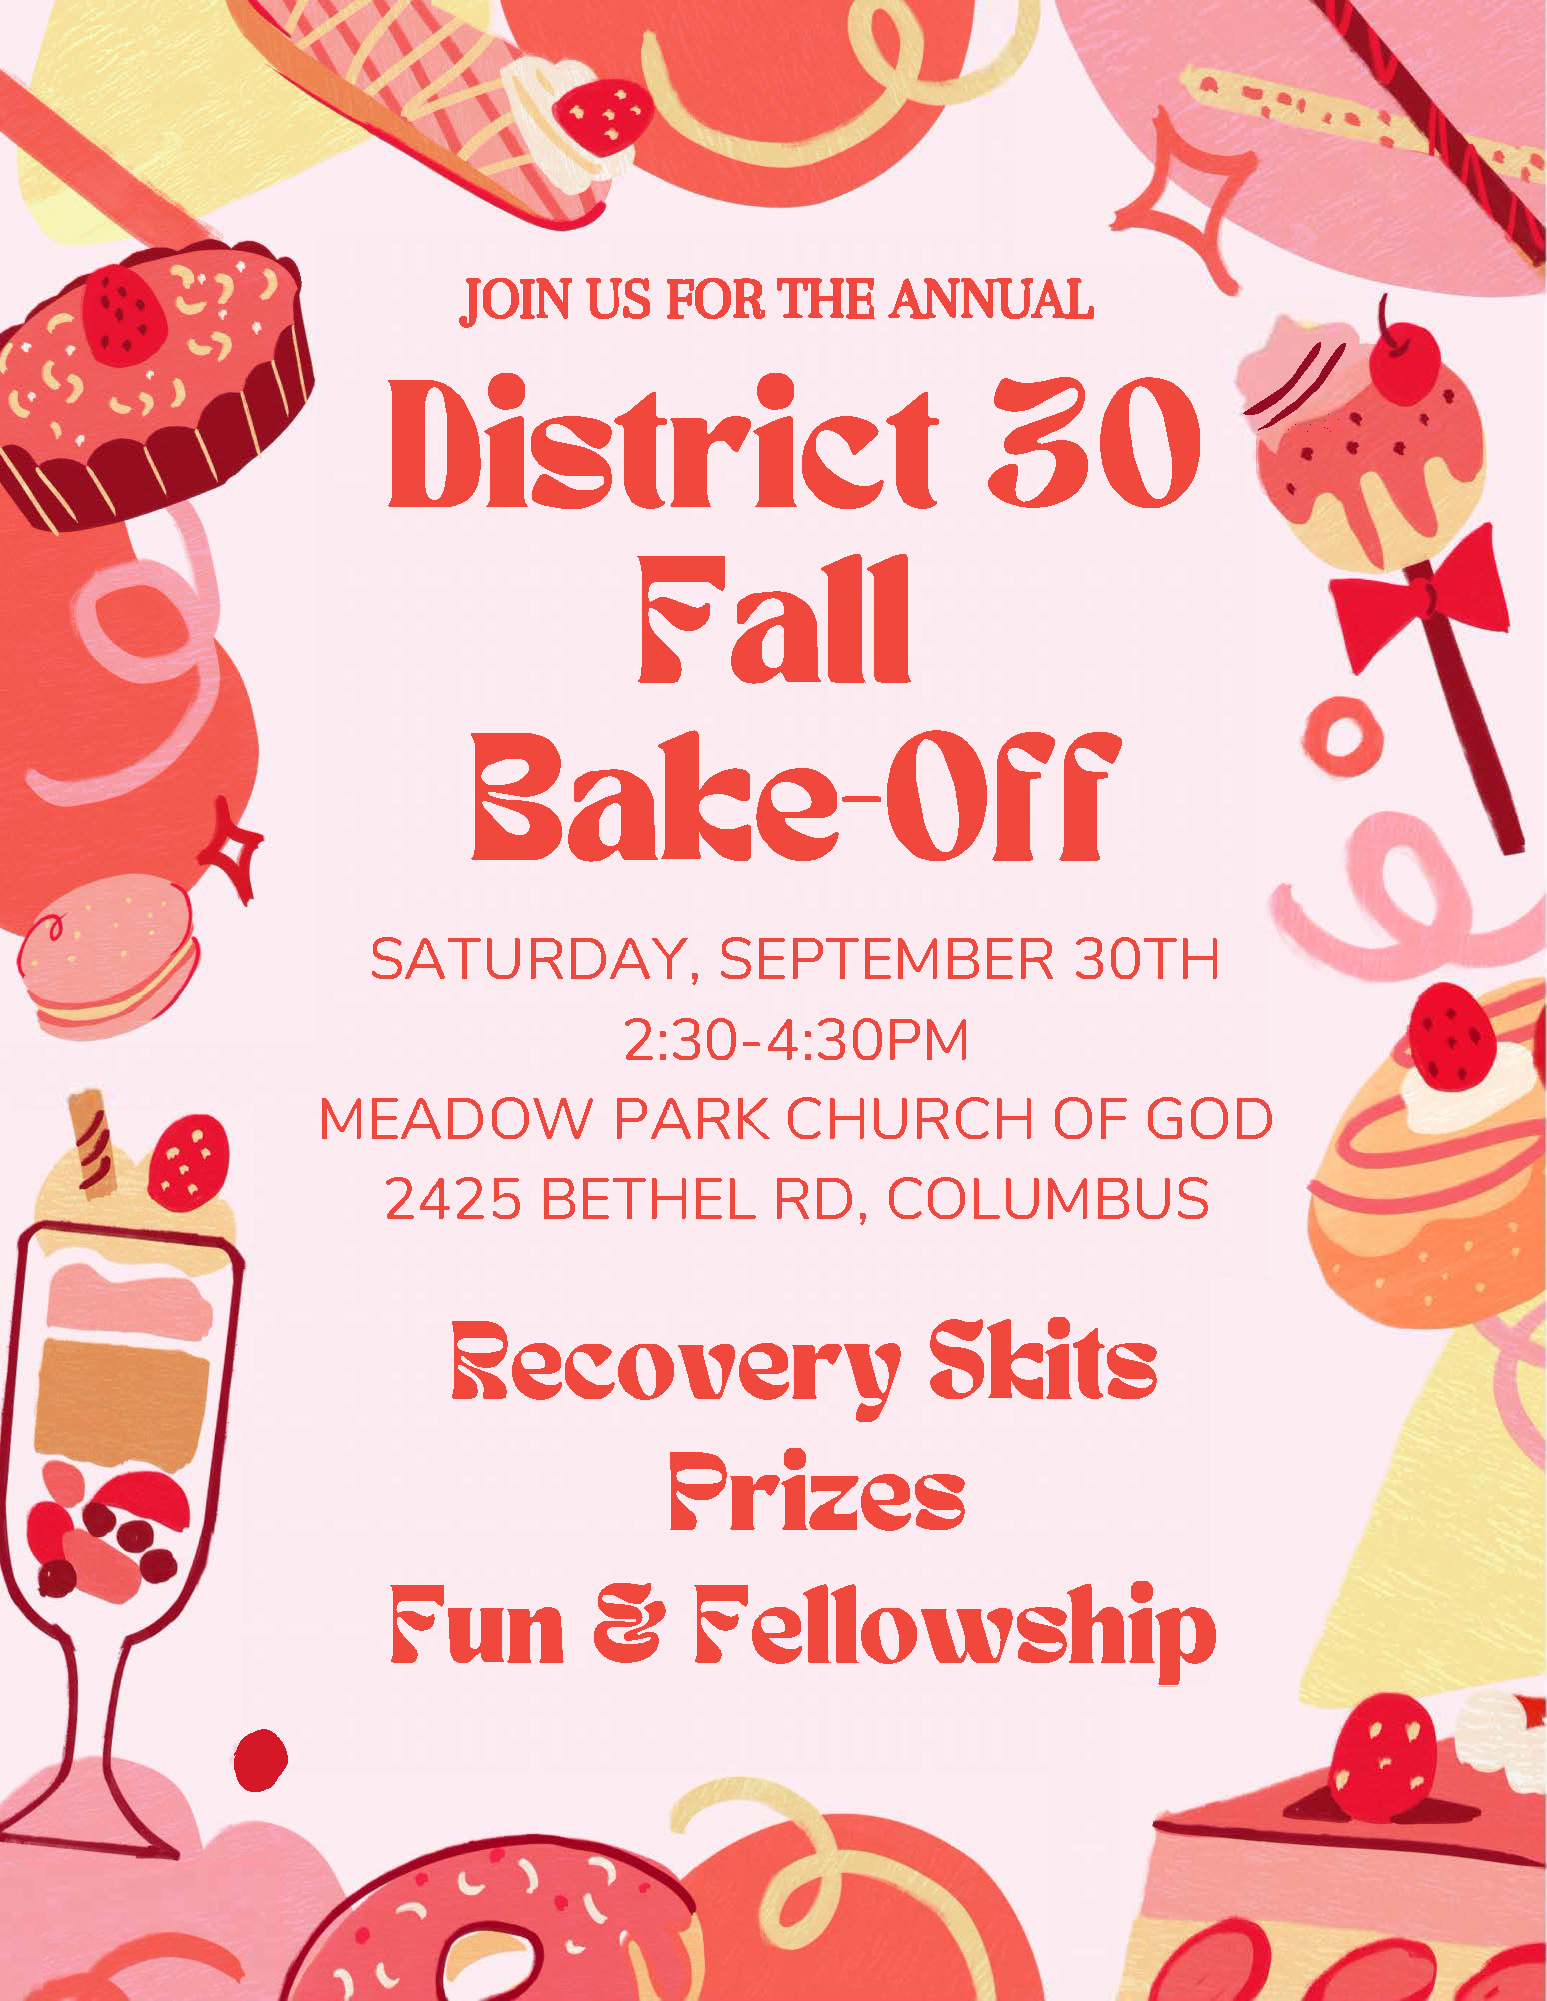 District 30 Fall Bake Off